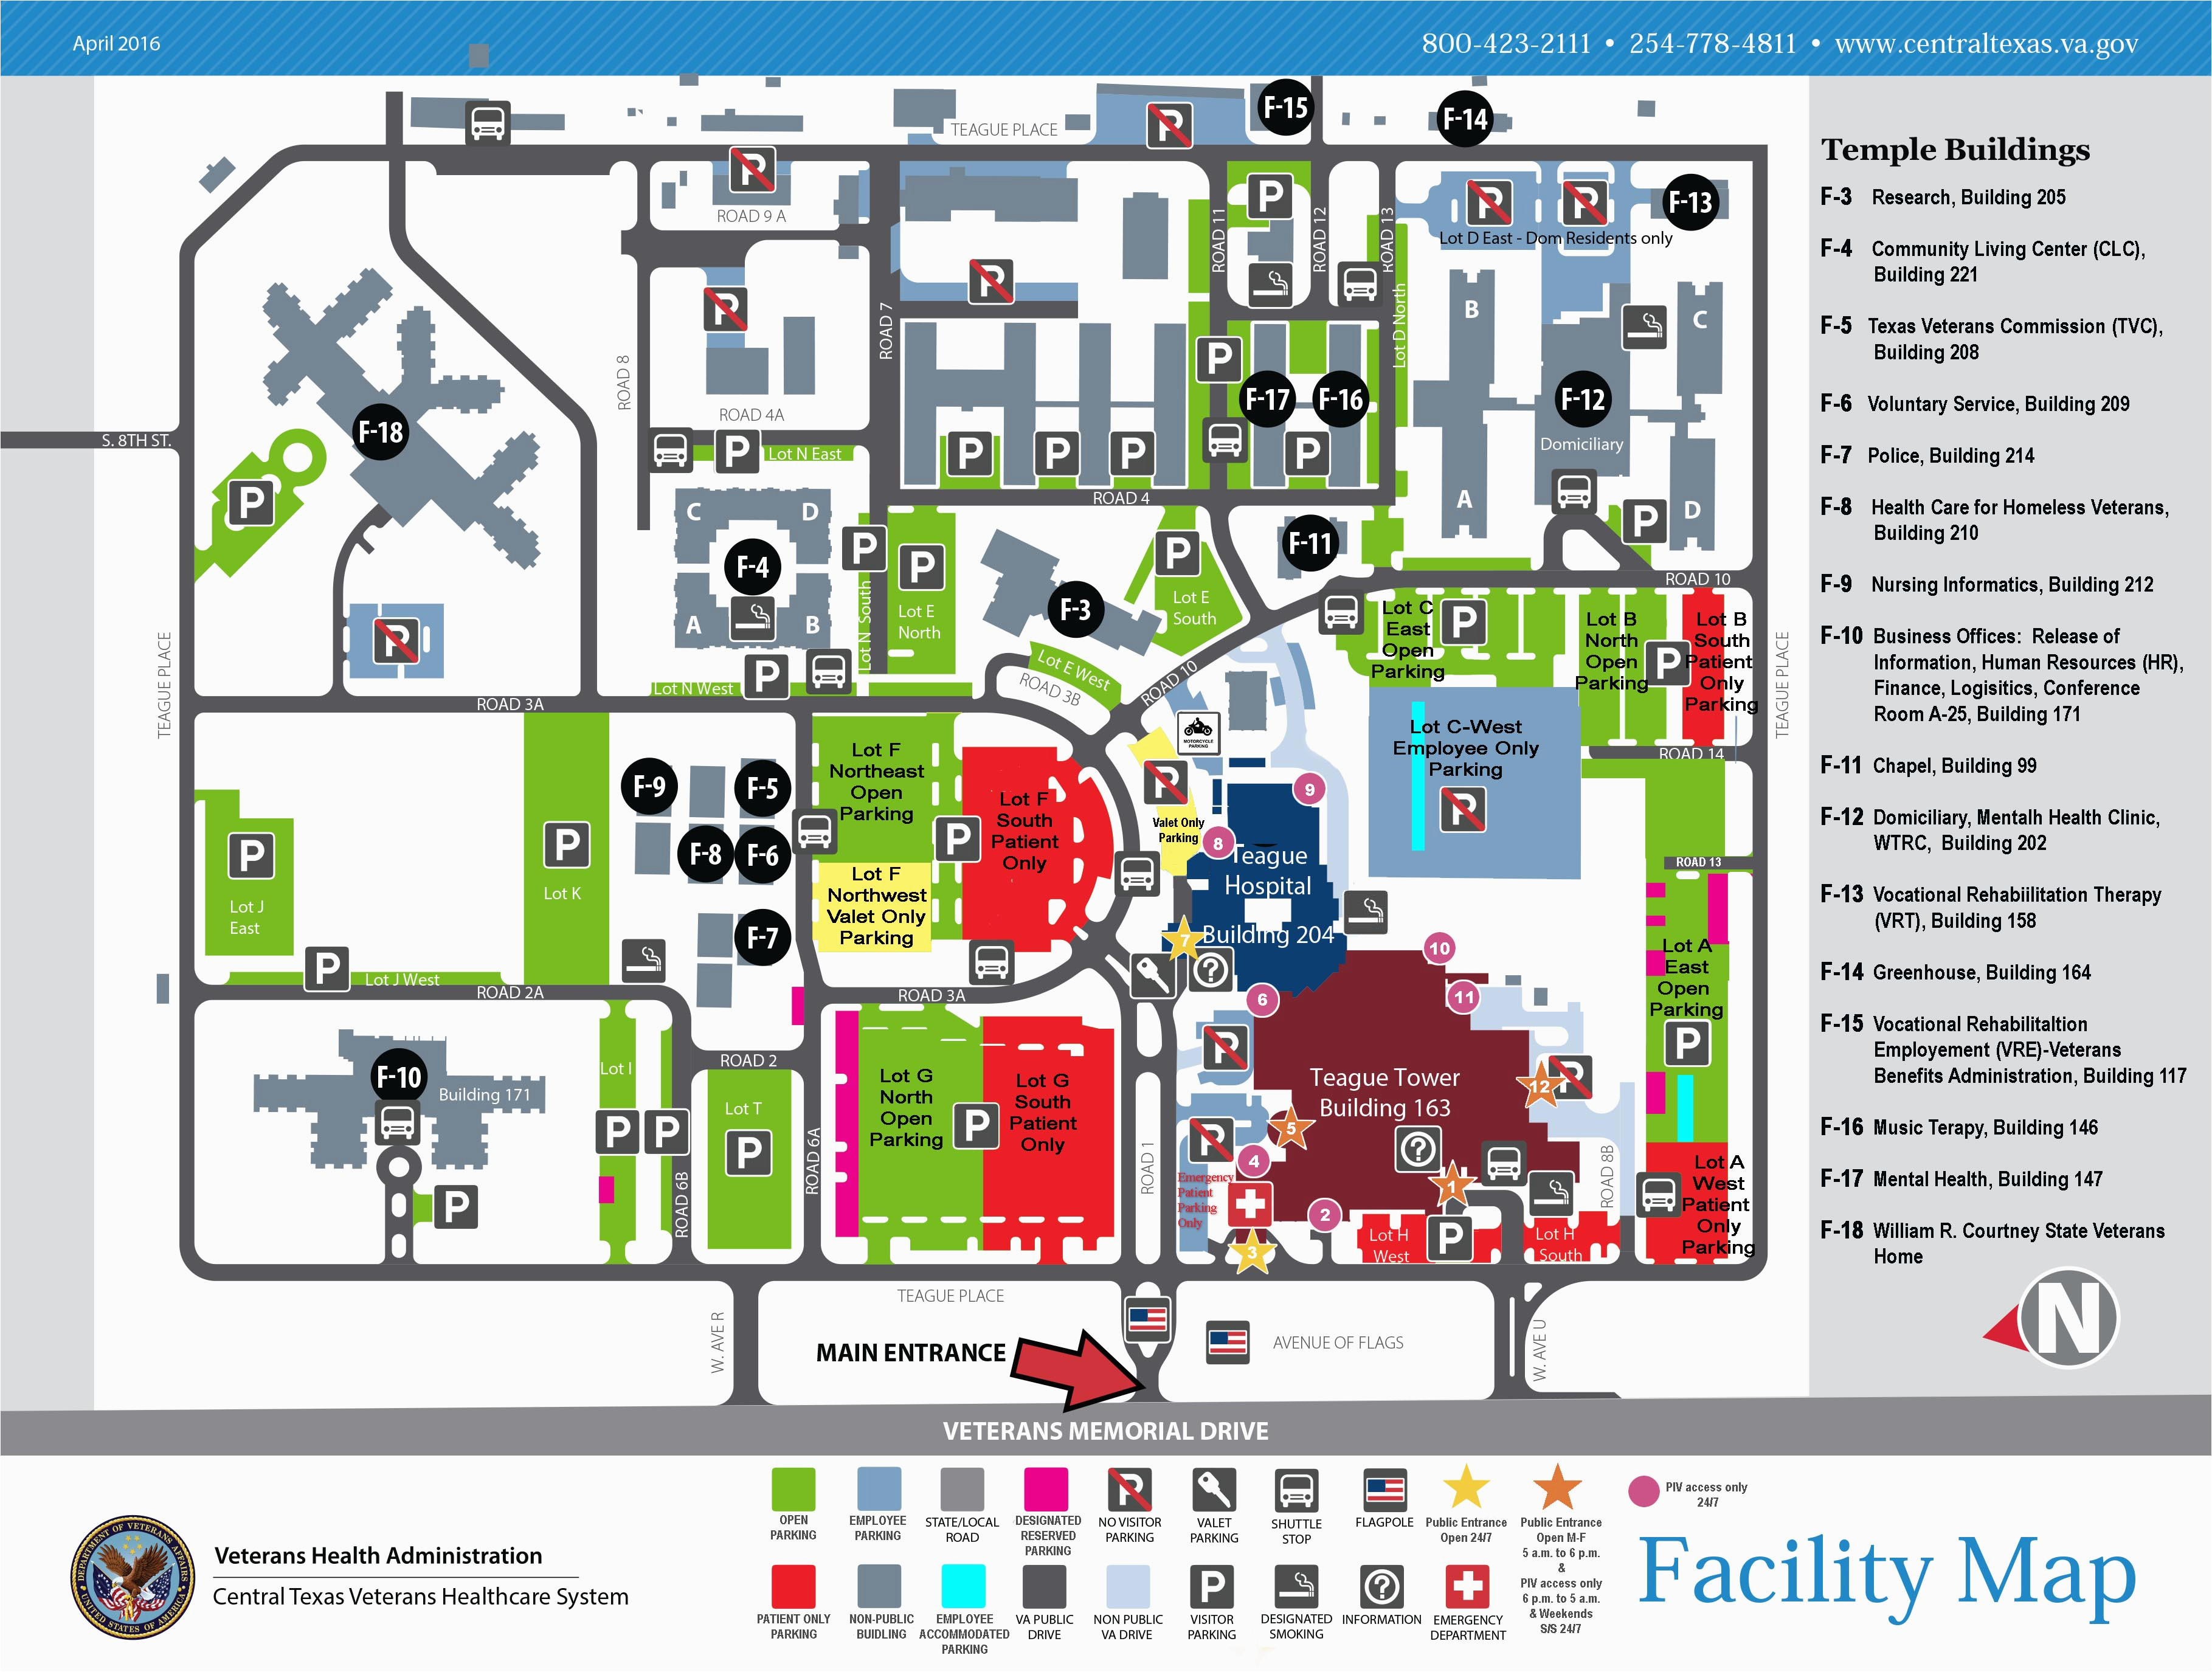 Flee the facility map